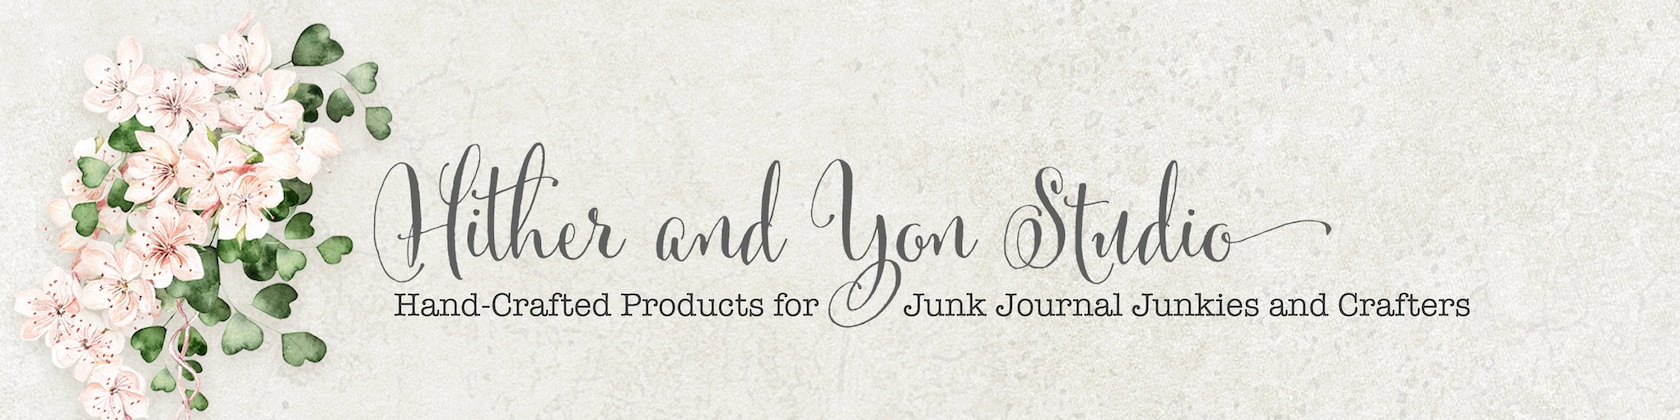 Color Me Autumn Junk Journal Kit - Hither and Yon Studio